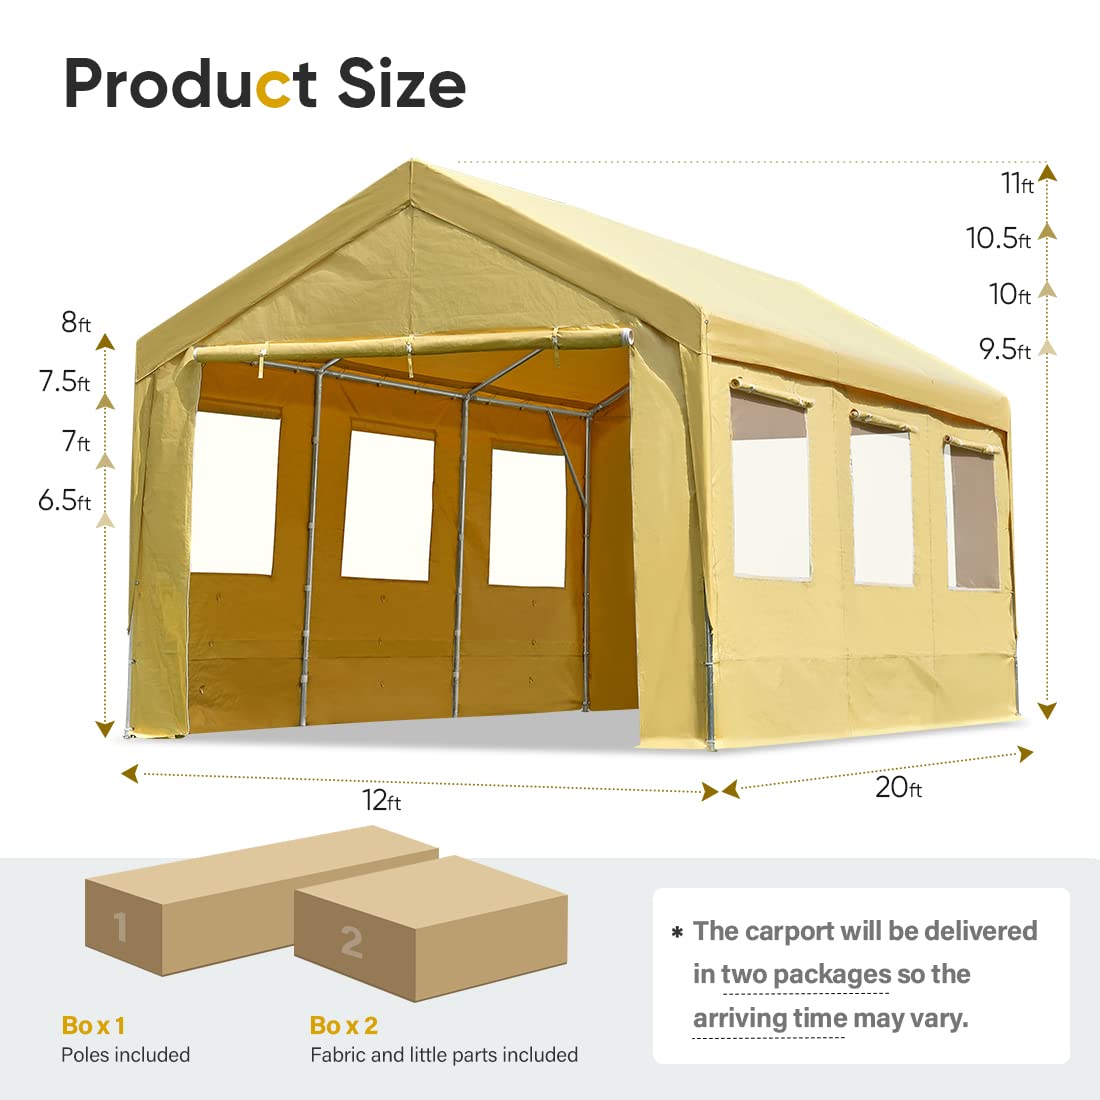 ADVANCE OUTDOOR 12x20 ft Heavy Duty Adjustable Carport with 6 Roll-up Ventilated Windows & Removable Sidewalls Car Canopy Garage Boat Shelter Party Tent, Peak Height from 9.5ft to 11ft, Beige Yellow 12'x20'